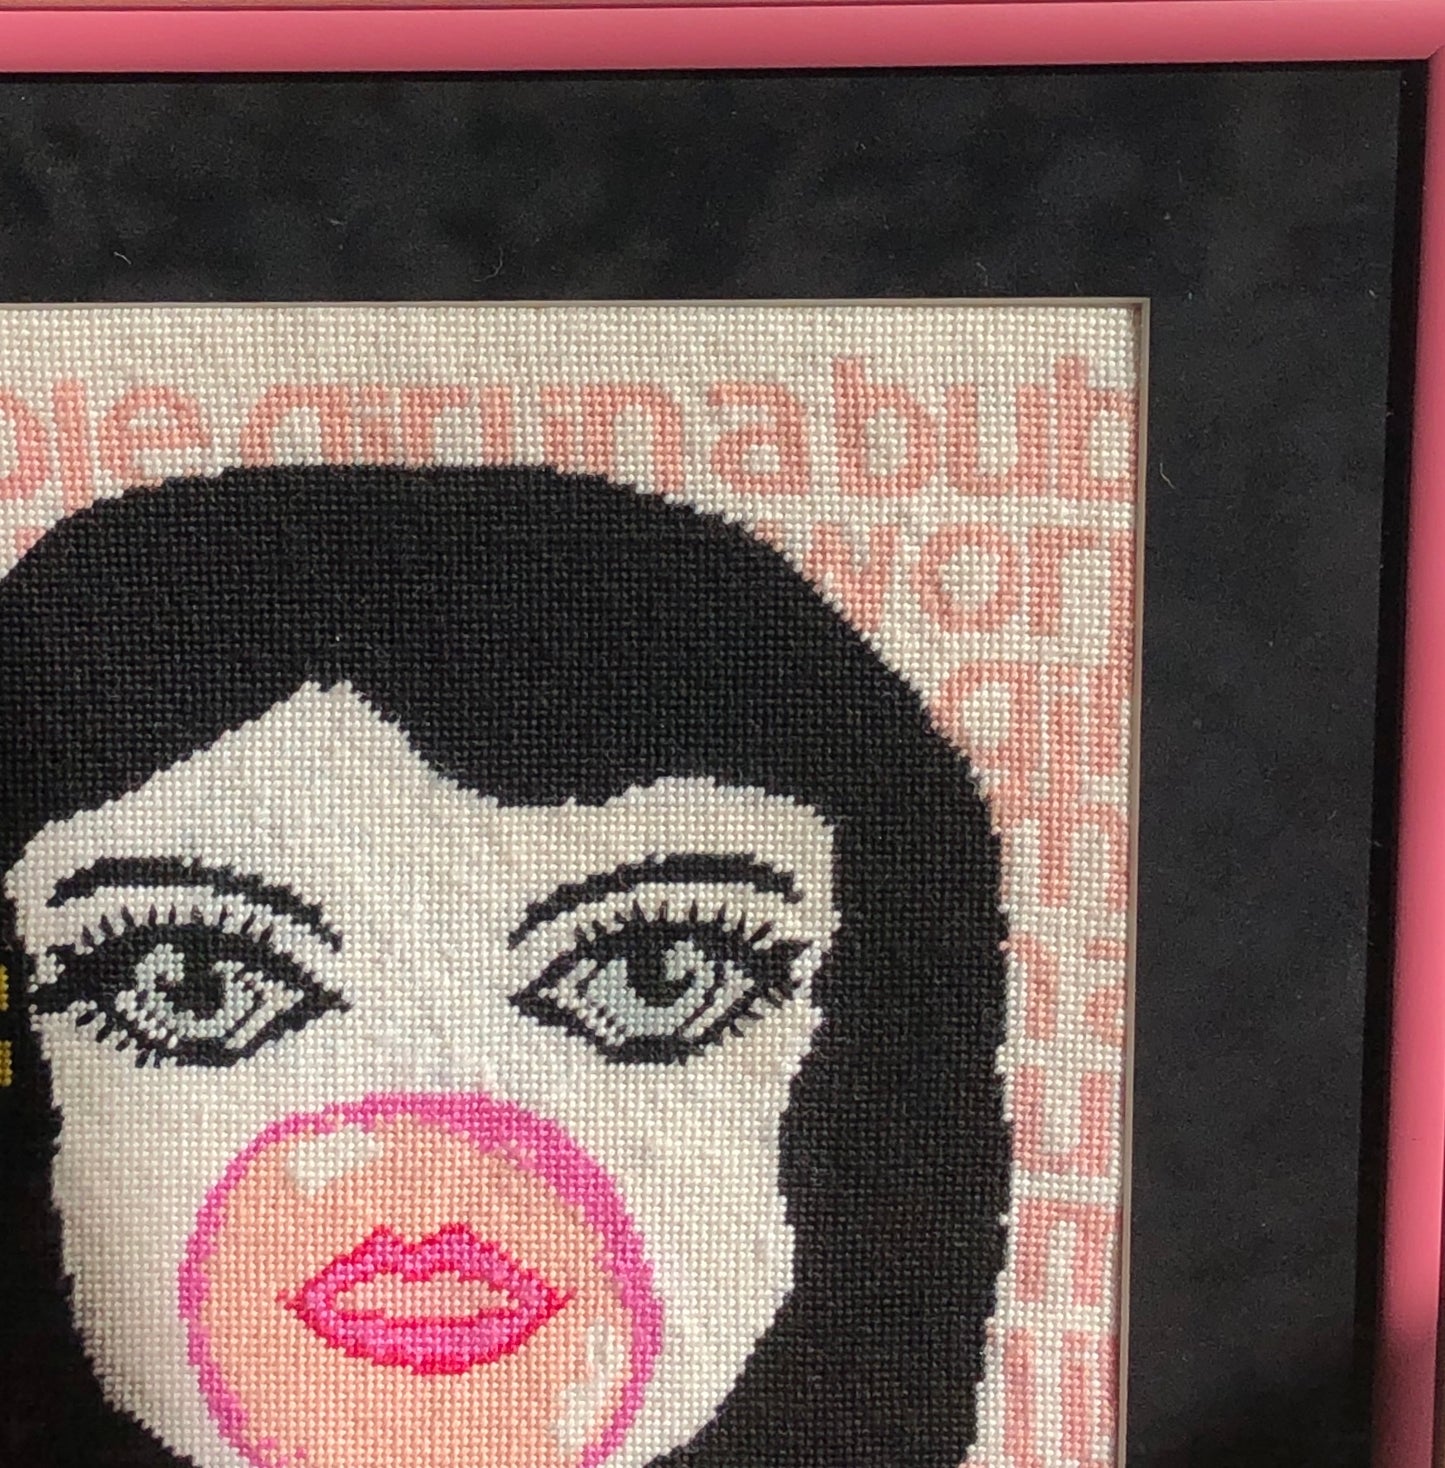 needlepoint big-eyed girl blowing pink bubble & hair flipped up, BUBBLE GIRL IN A BUBBLE GUM WORLD text behind image